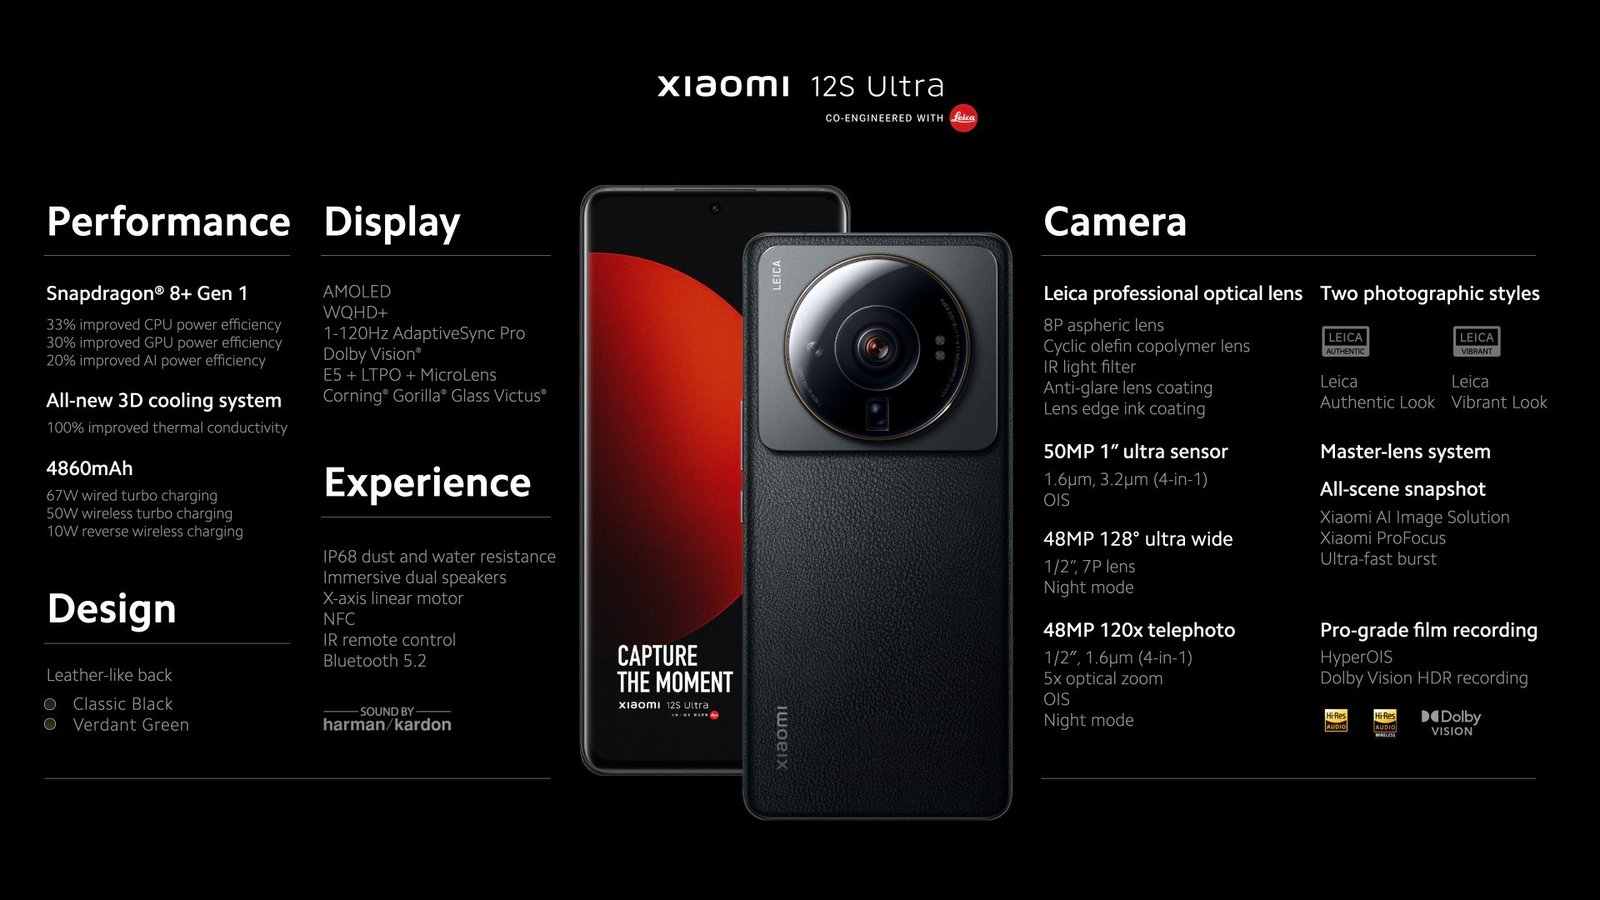 Xiaomi 12S Ultra goes official and packs a 50.3MP 1-inch Sony